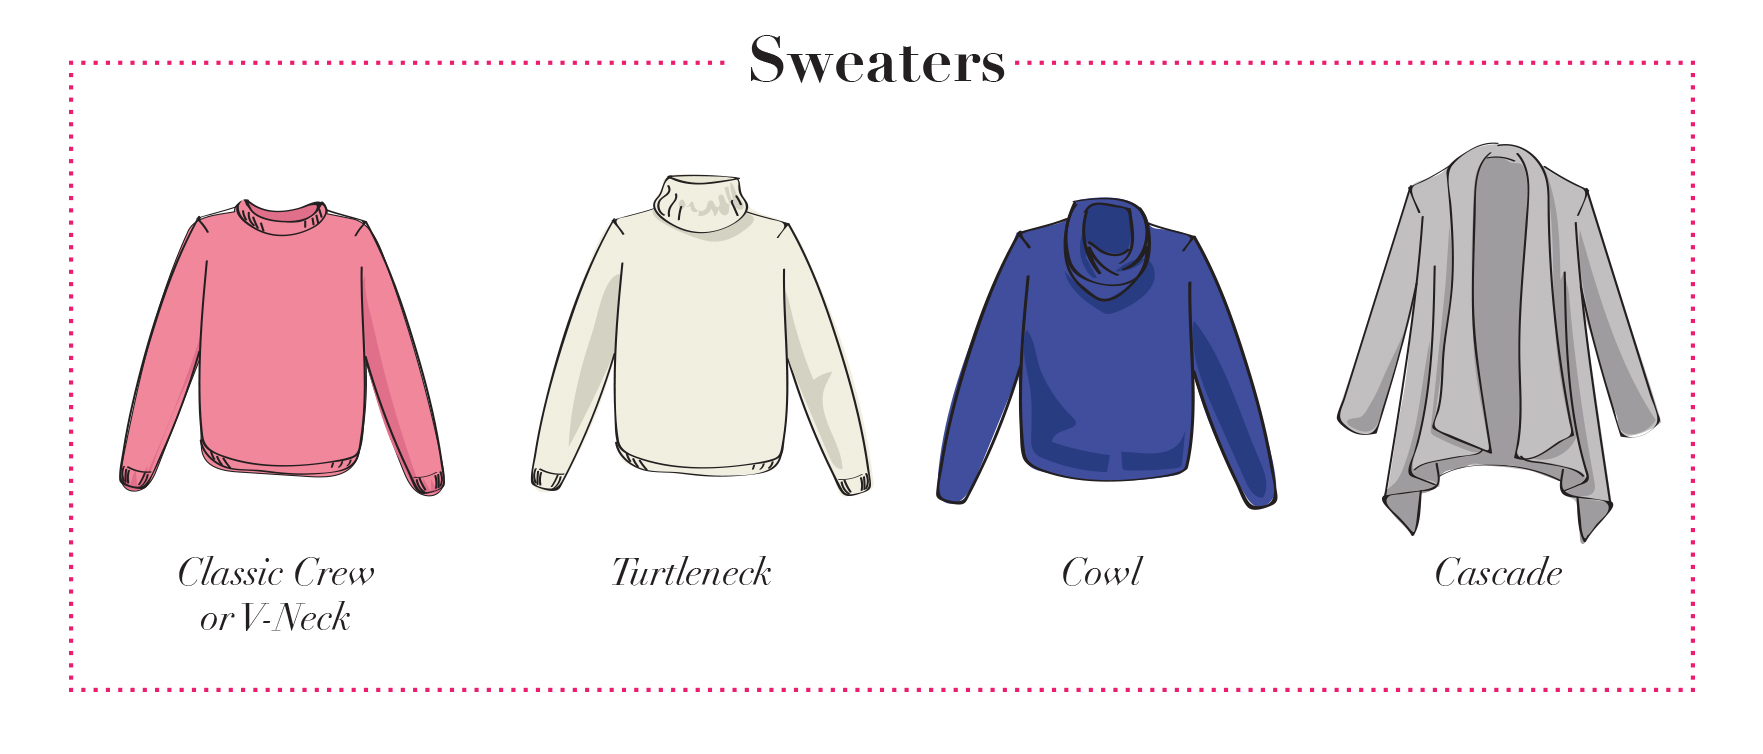 The Guide to Easy Dressing - Sweaters and Cardigans - Image Intelligence